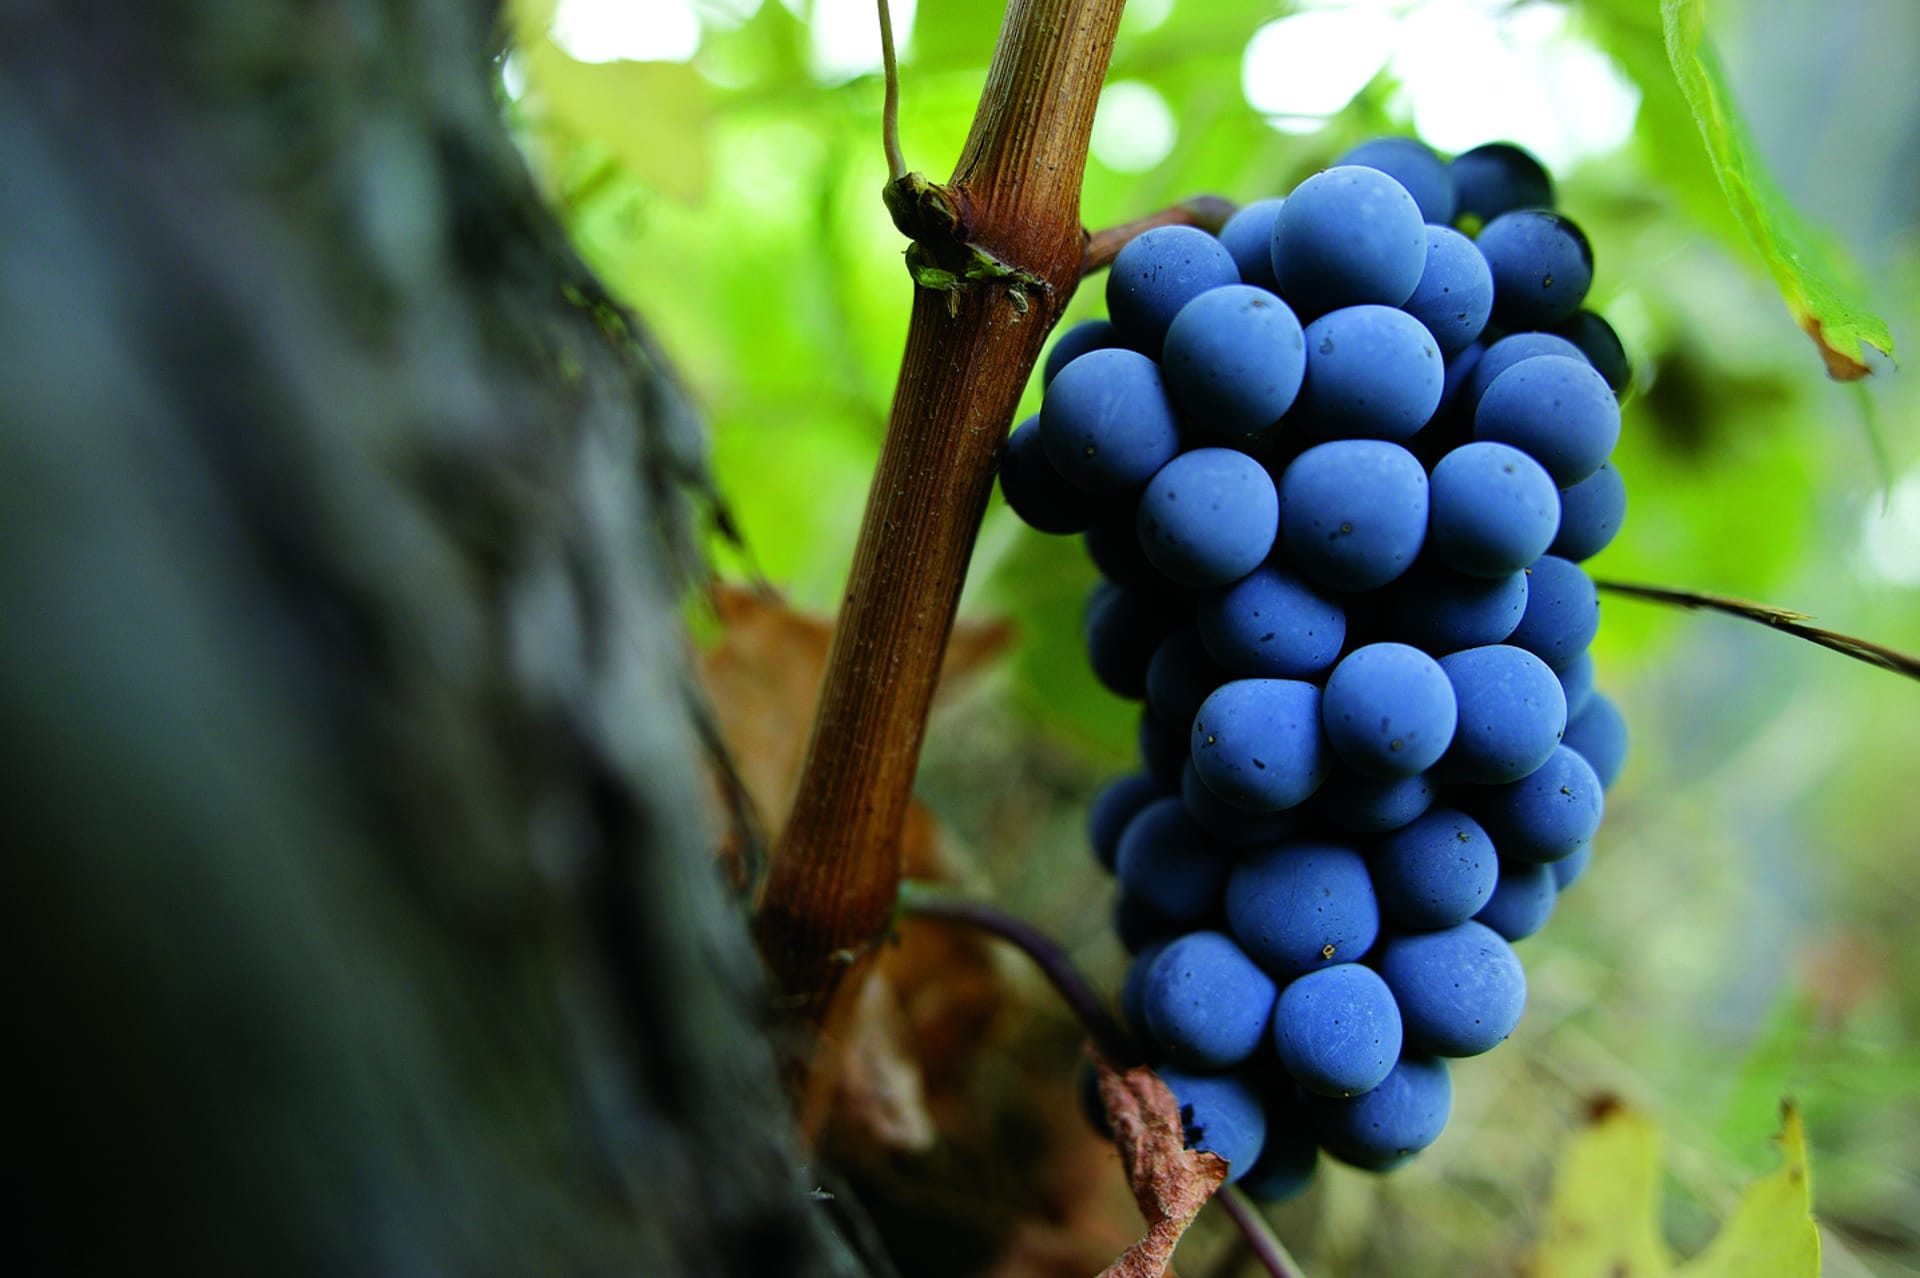 Halkidiki’s Limnio grapes produce aromatic red wines